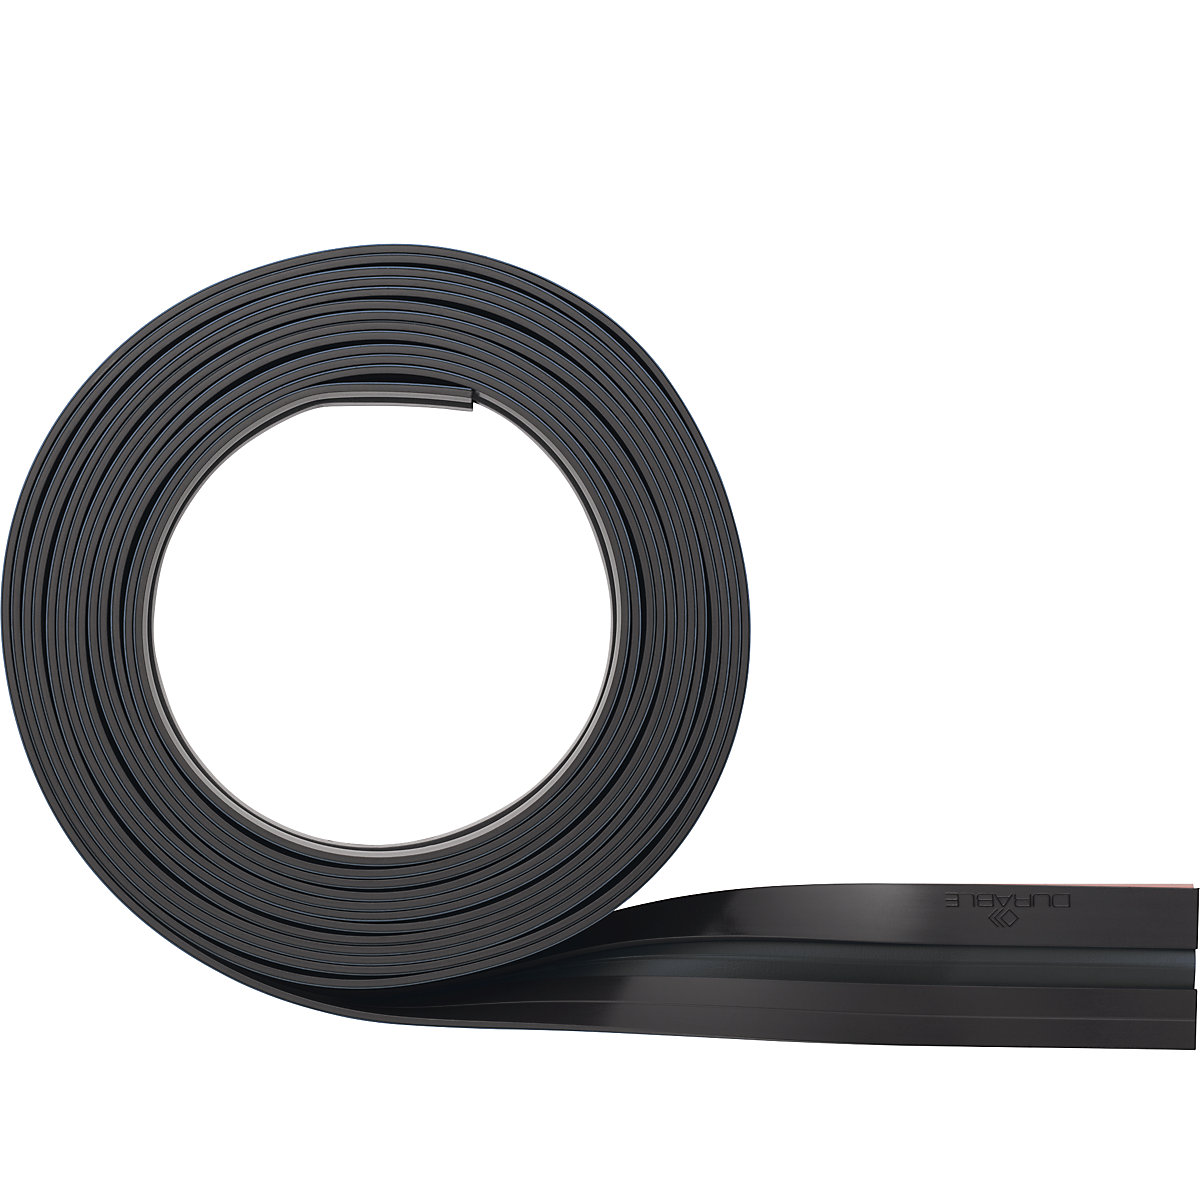 DURAFIX® ROLL self adhesive magnetic strip – DURABLE, 5 m on a roll, pack of 2, black-8